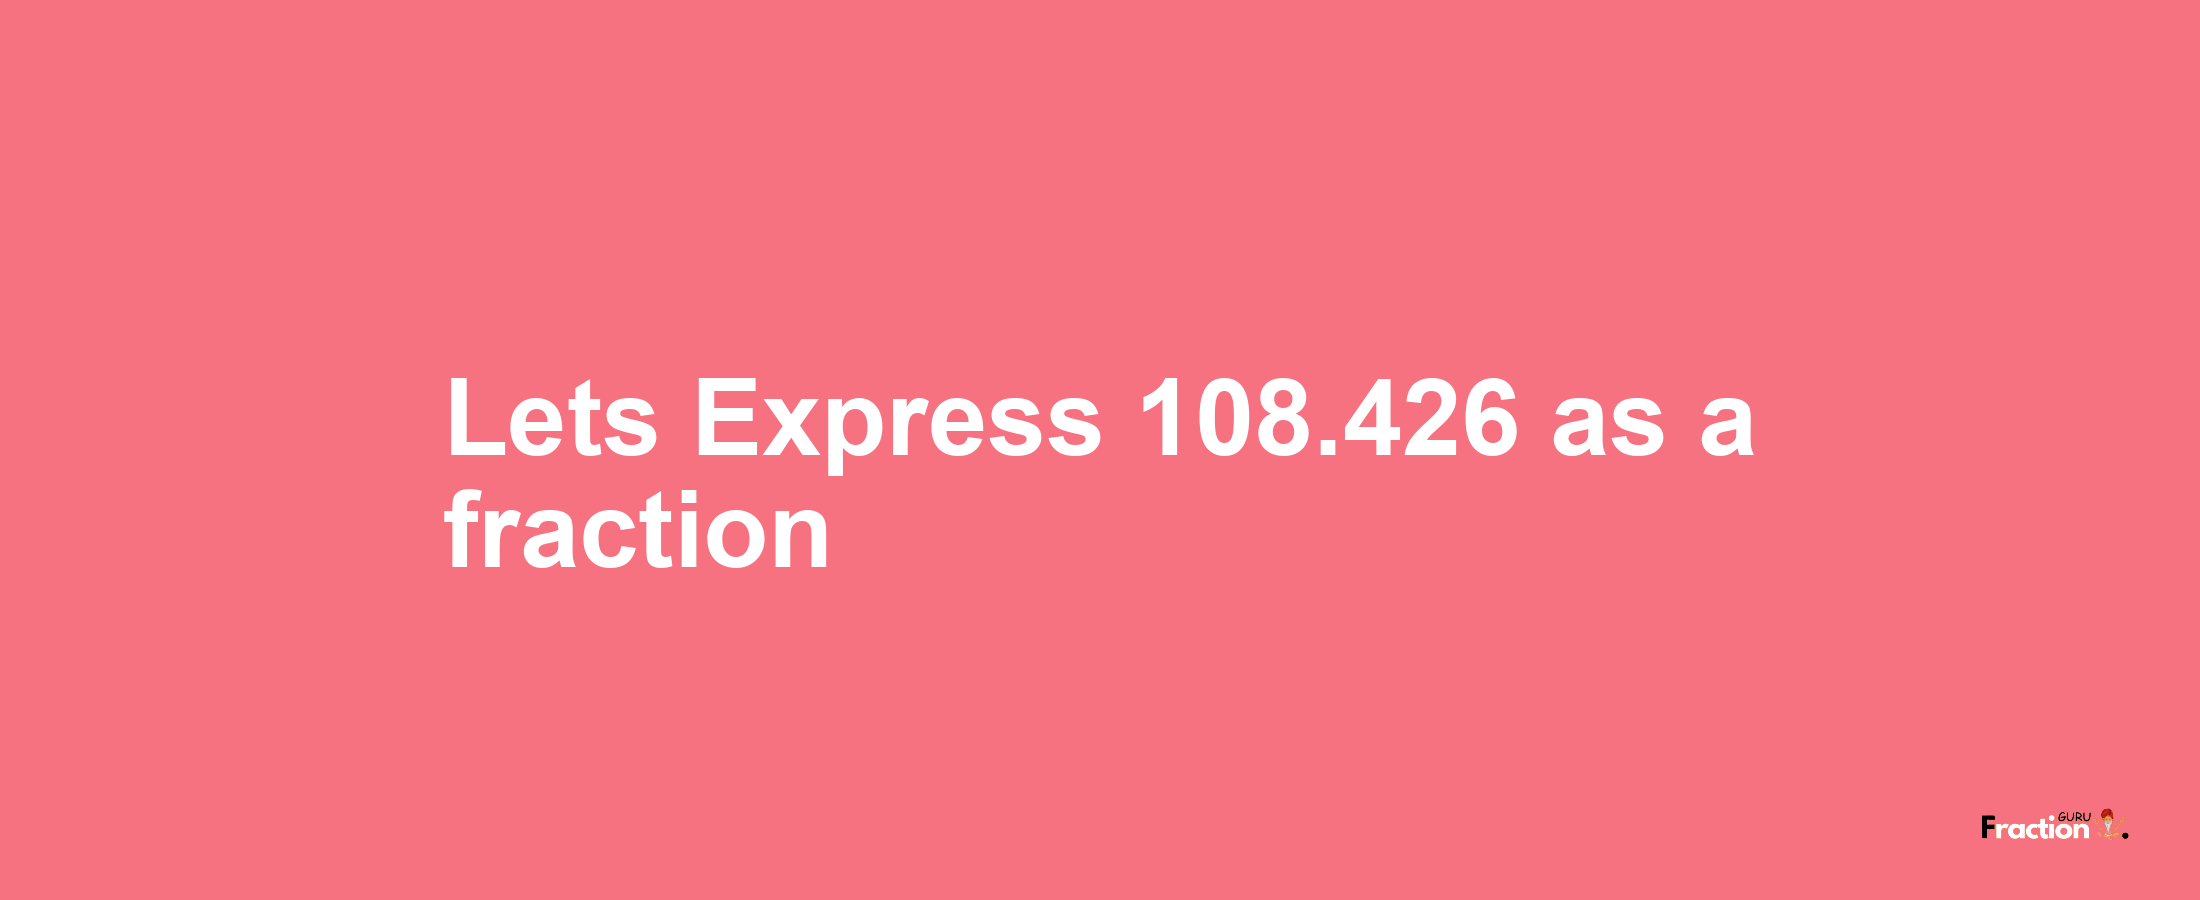 Lets Express 108.426 as afraction